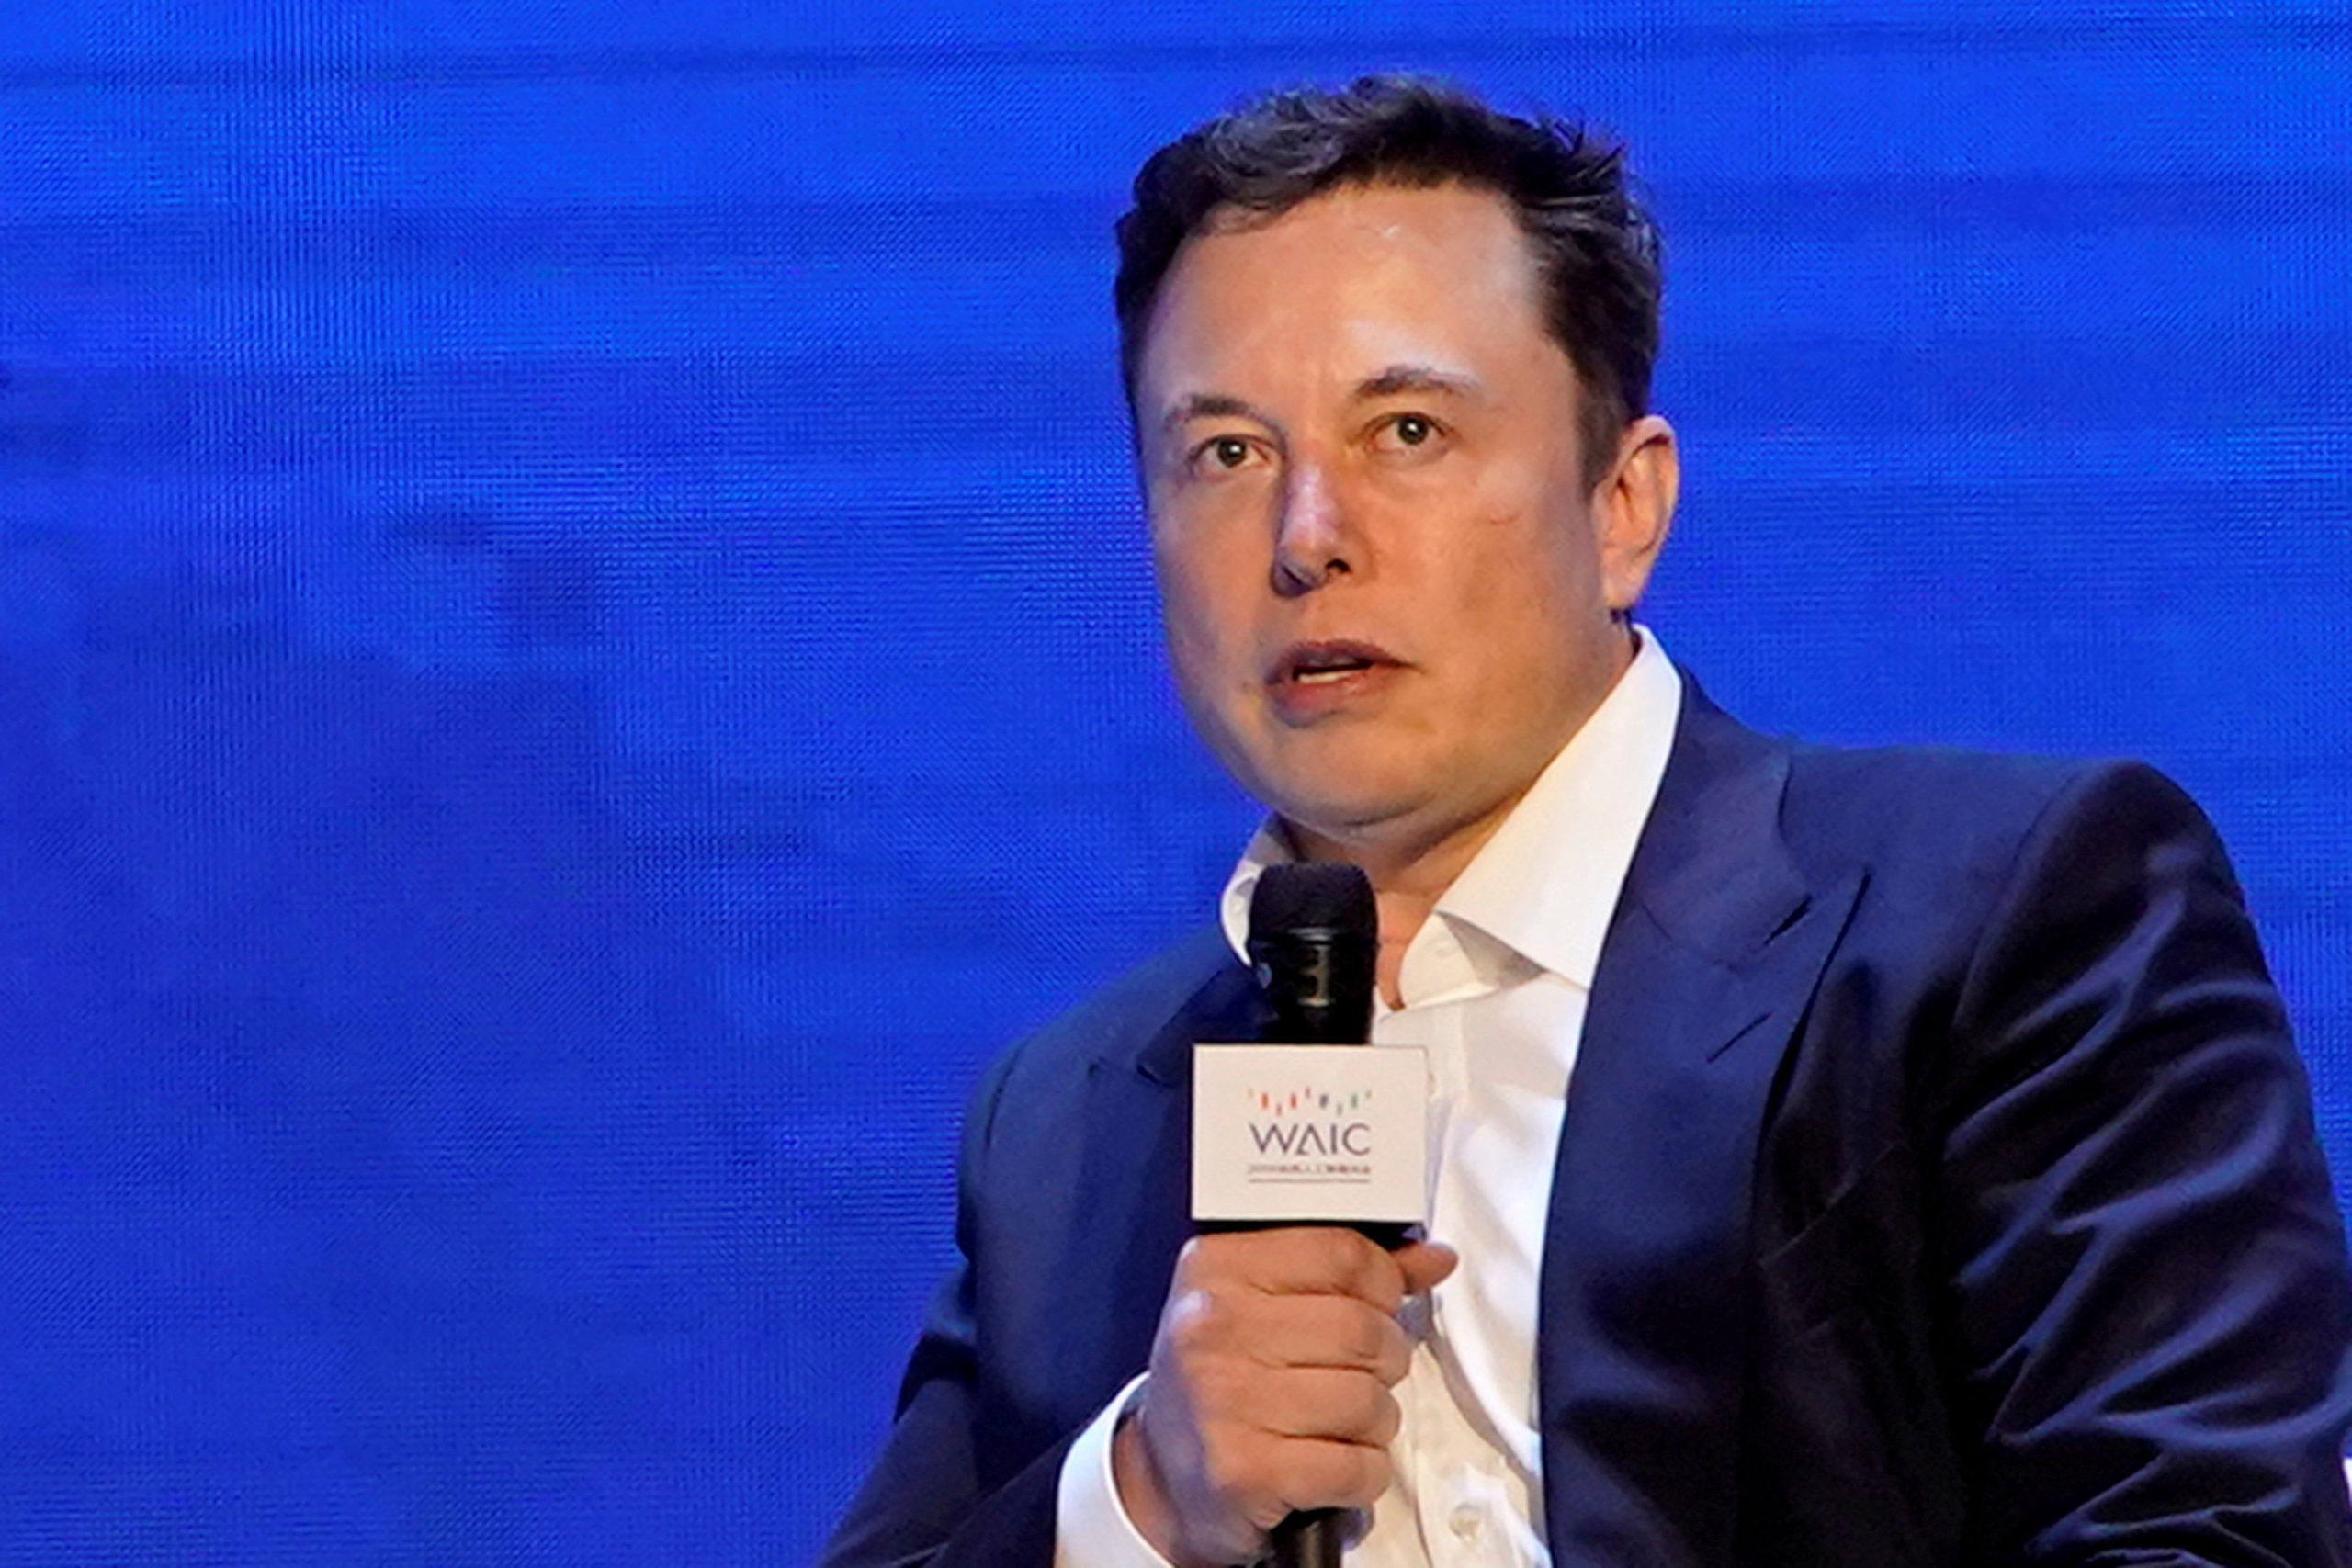 FILE PHOTO: FILE PHOTO: Tesla Inc CEO Elon Musk attends the World Artificial Intelligence Conference (WAIC) in Shanghai, China August 29, 2019. REUTERS/Aly Song/File Photo/File Photo